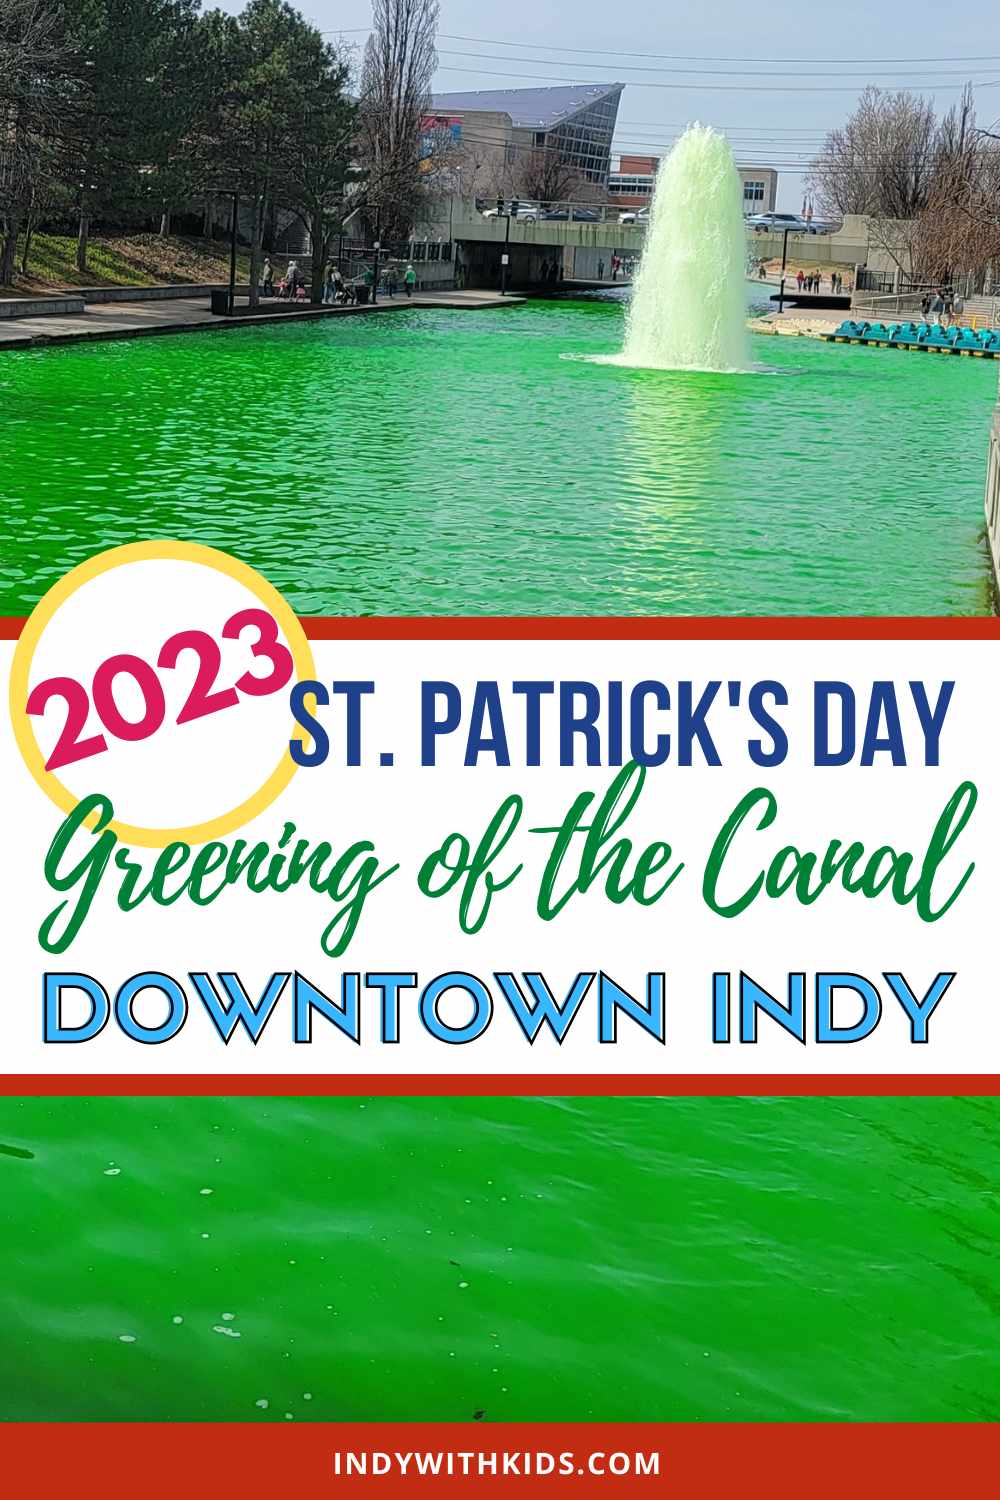 St. Patrick's Day Greening of the Canal